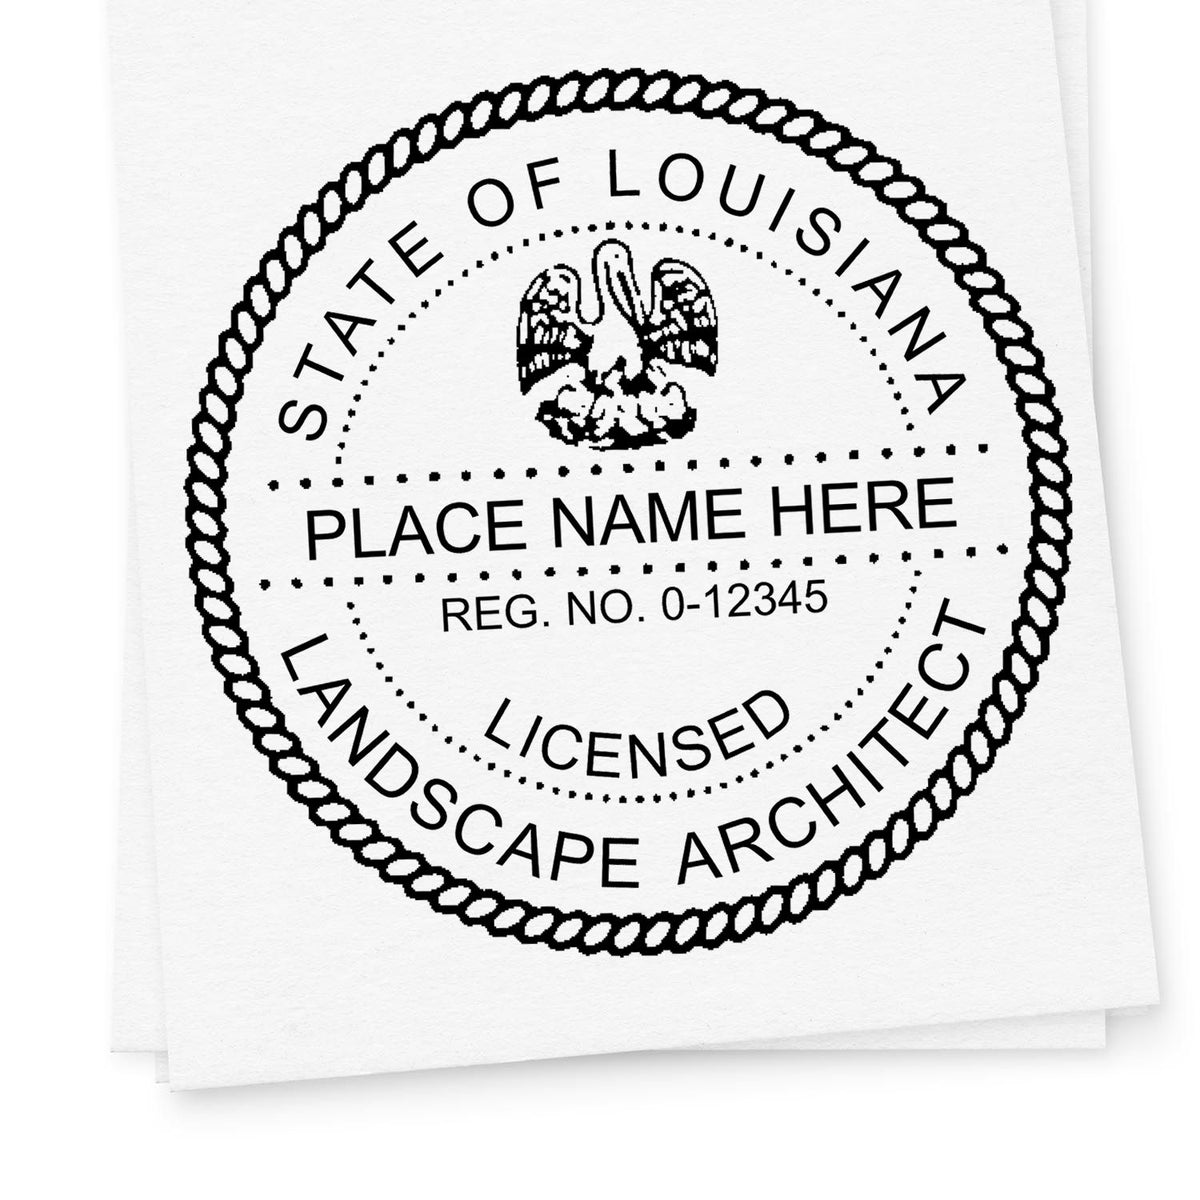 This paper is stamped with a sample imprint of the Slim Pre-Inked Louisiana Landscape Architect Seal Stamp, signifying its quality and reliability.